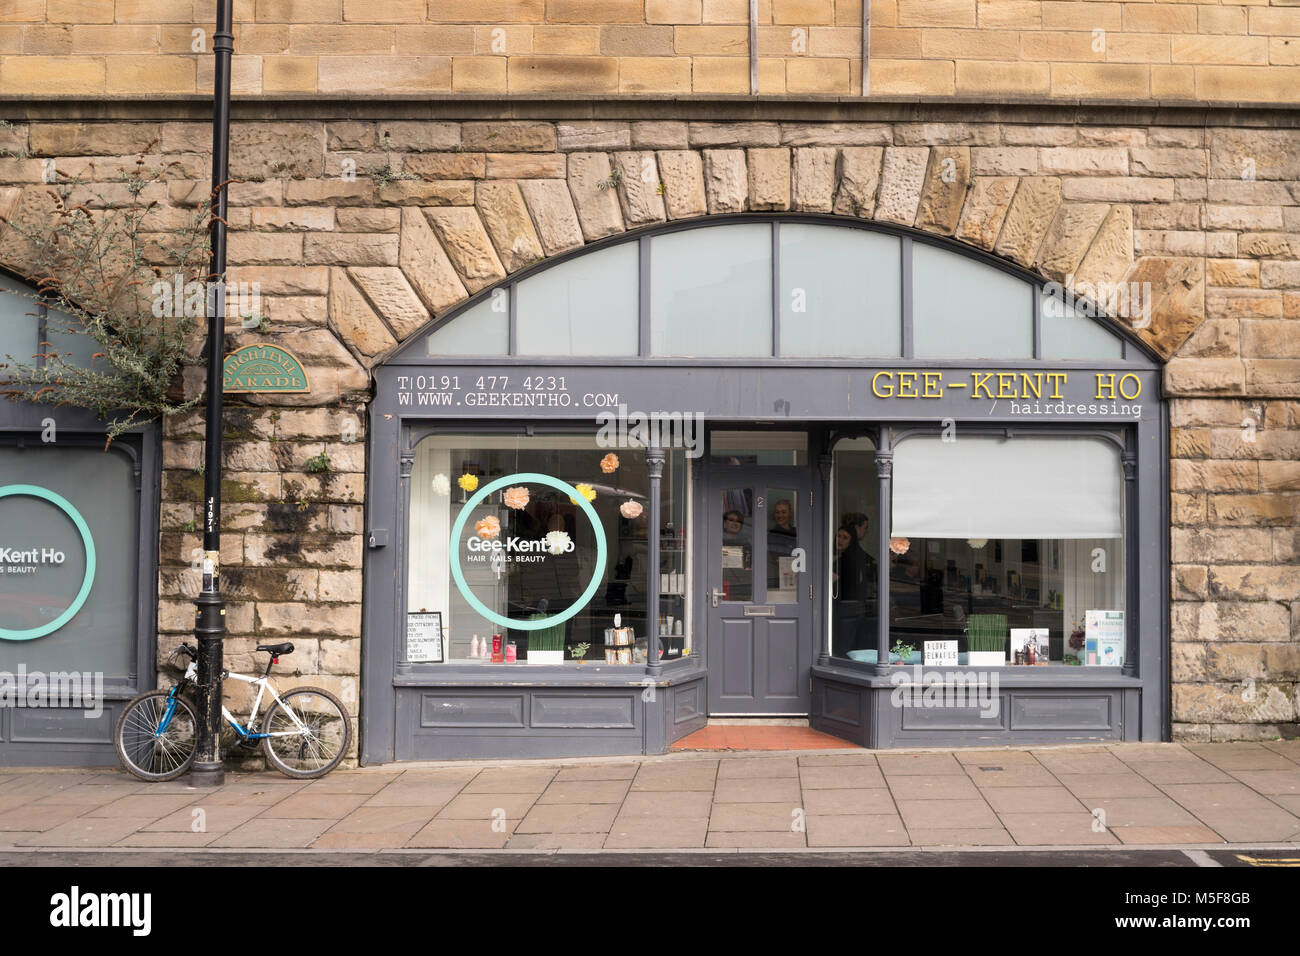 Gee-Kent Ho,Hairdresser's salon under a railway arch in Gateshead, north east England UK. Stock Photo